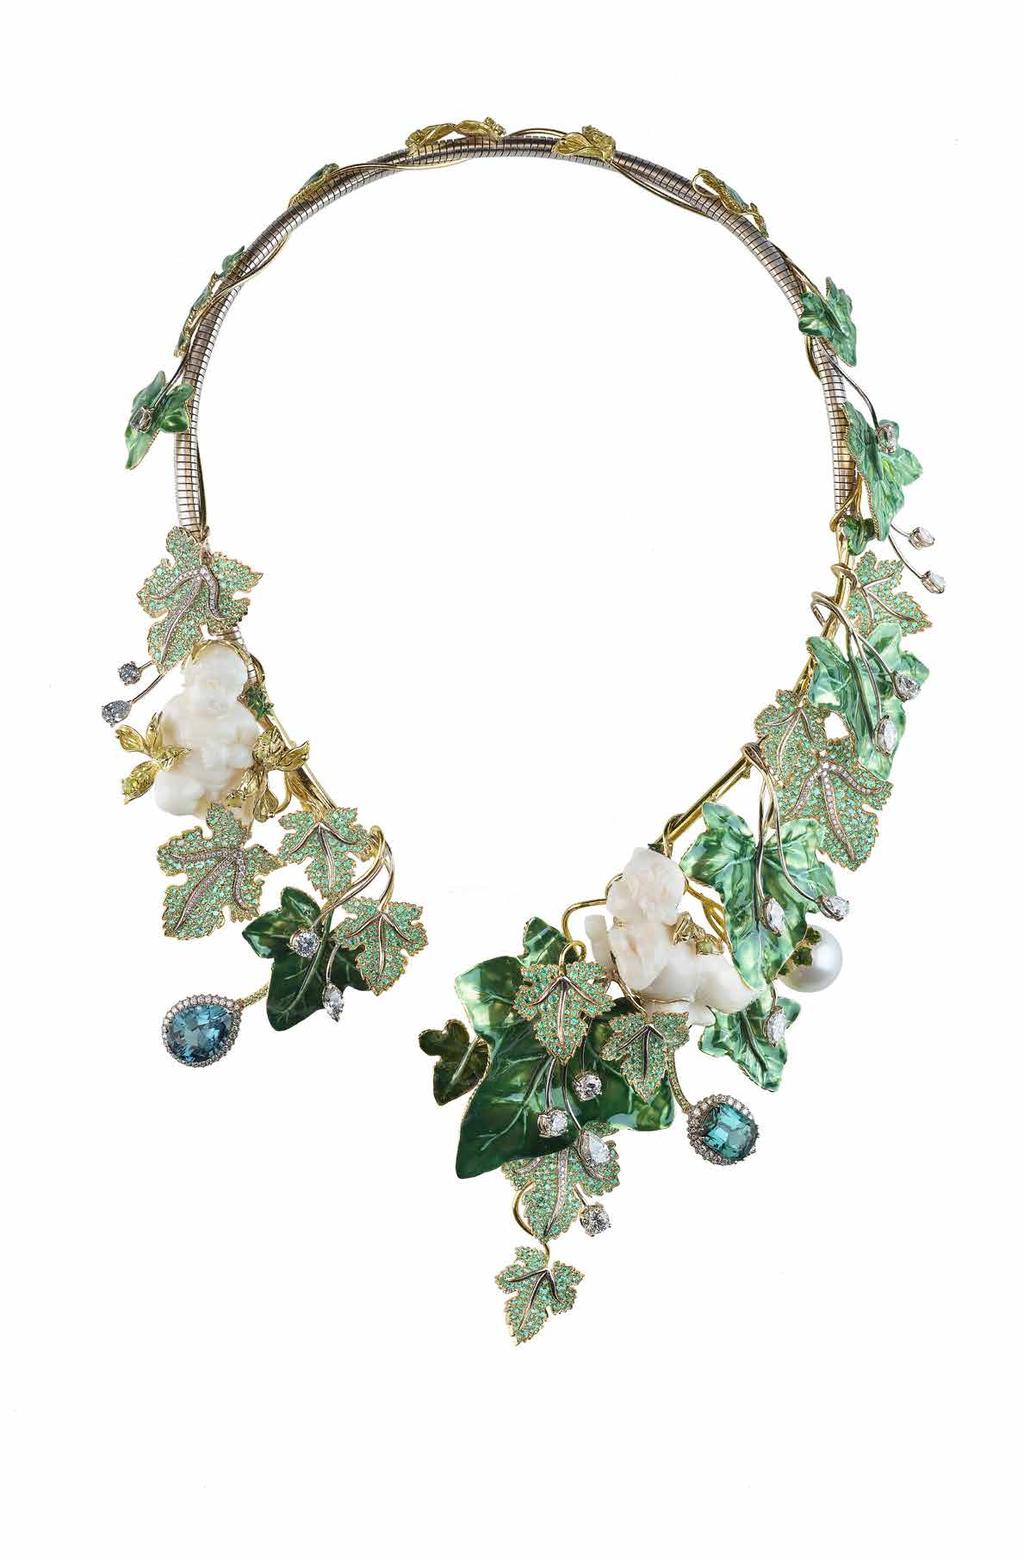 Necklace by Dolce&Gabbana in yellow and white gold with Lagoon tourmalines, peridots, tsavorite garnets, emeralds, diamonds, coral and South Sea pearls; Alta Gioielleria Donna, December 2018. POA.